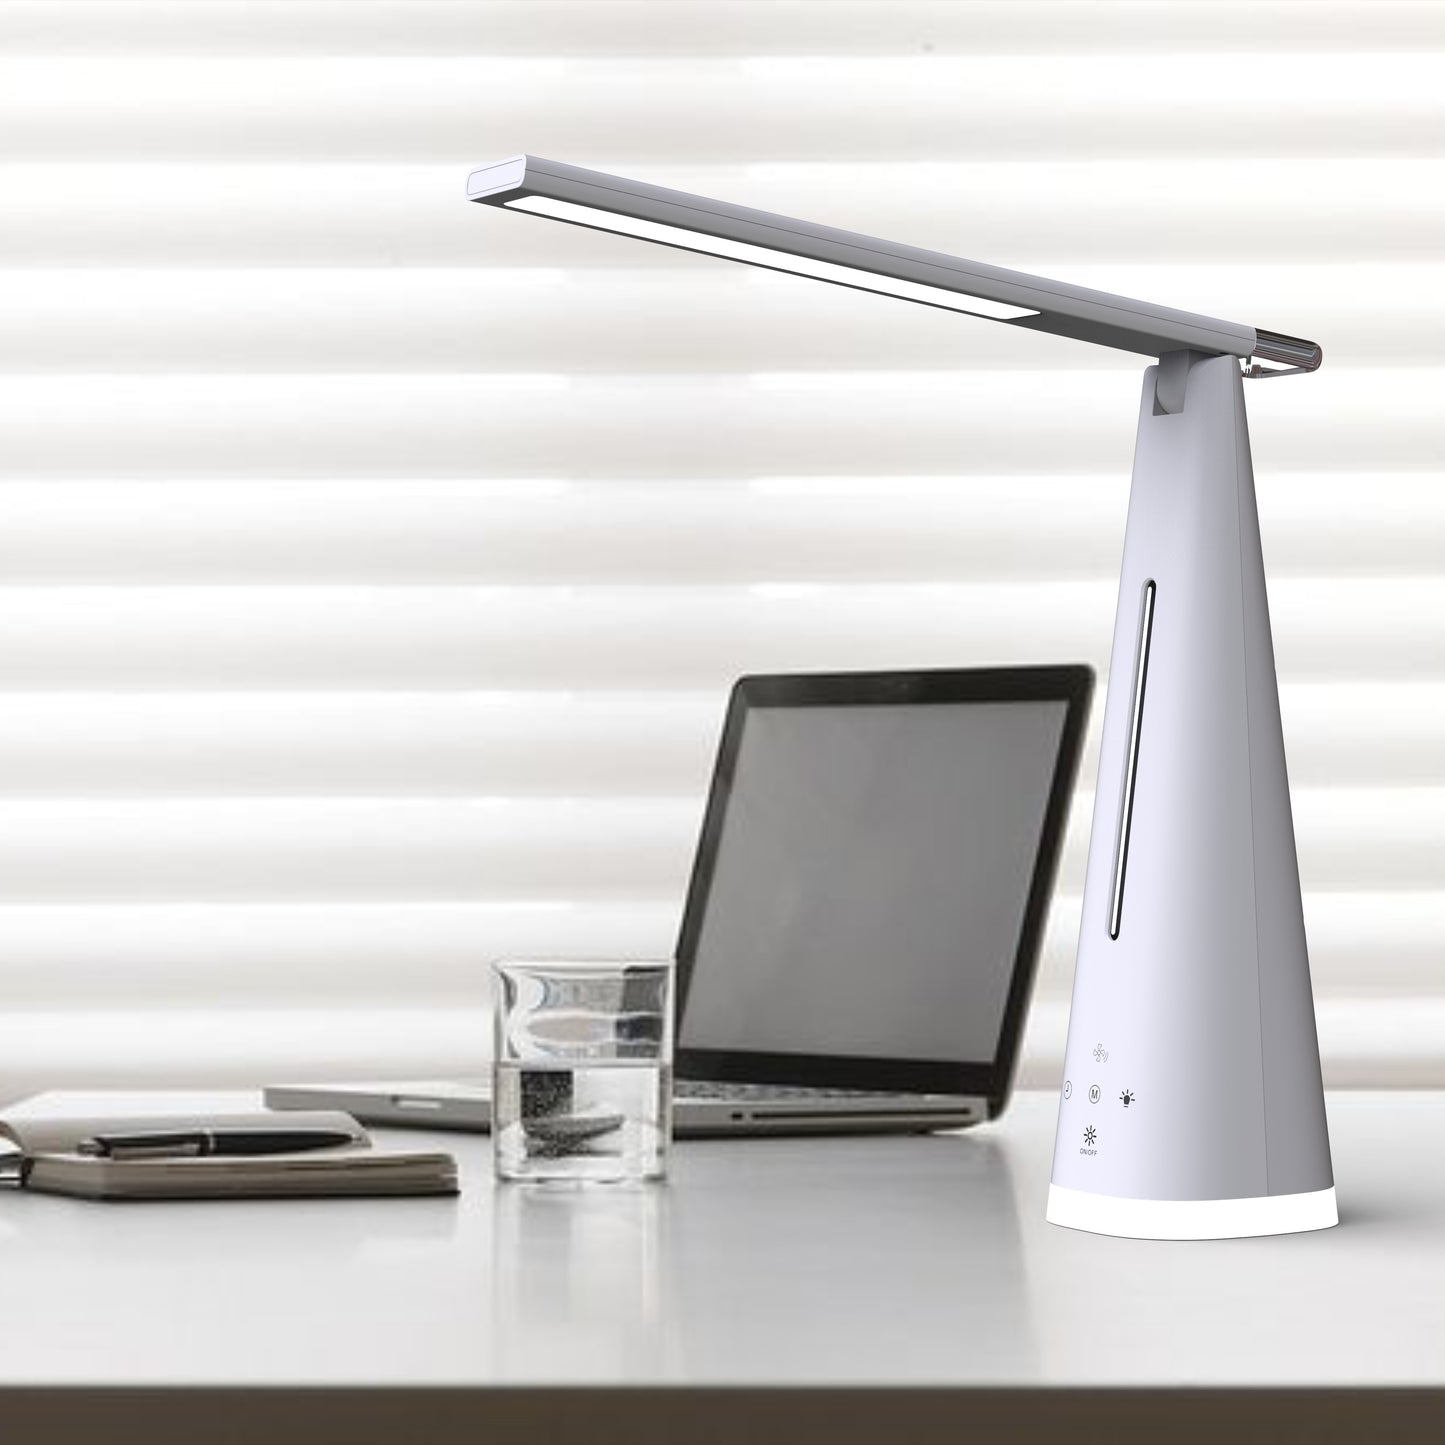 DAC® MP-331 LED Desk Lamp with HEPA Air Purifier and Mood Light